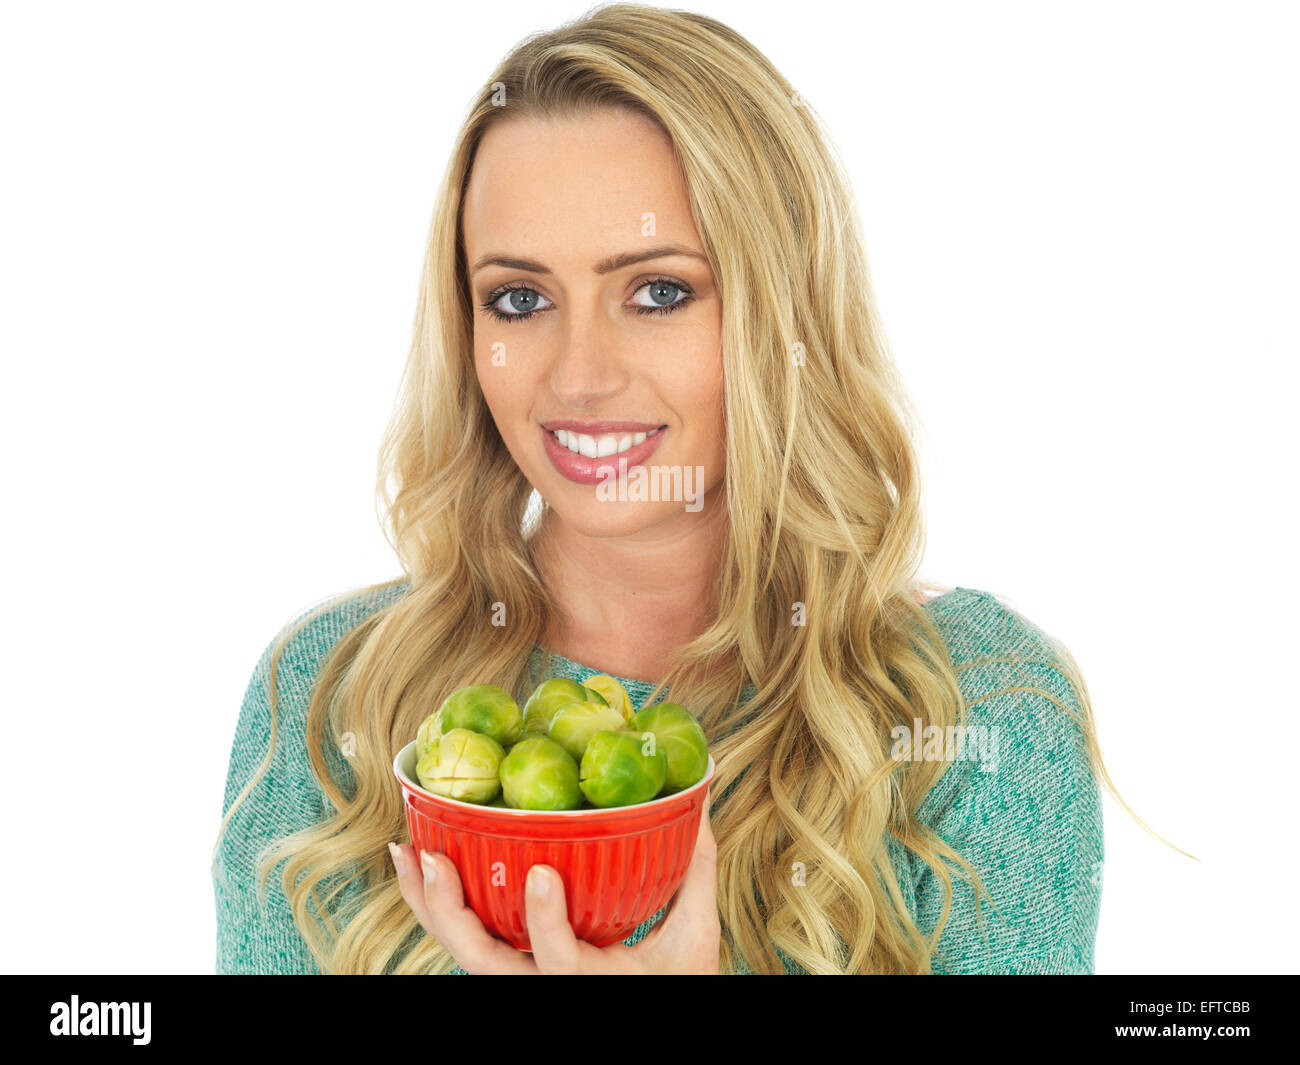 Attractive Young Woman Holding a Bowl of Brussels Sprouts Stock Photo